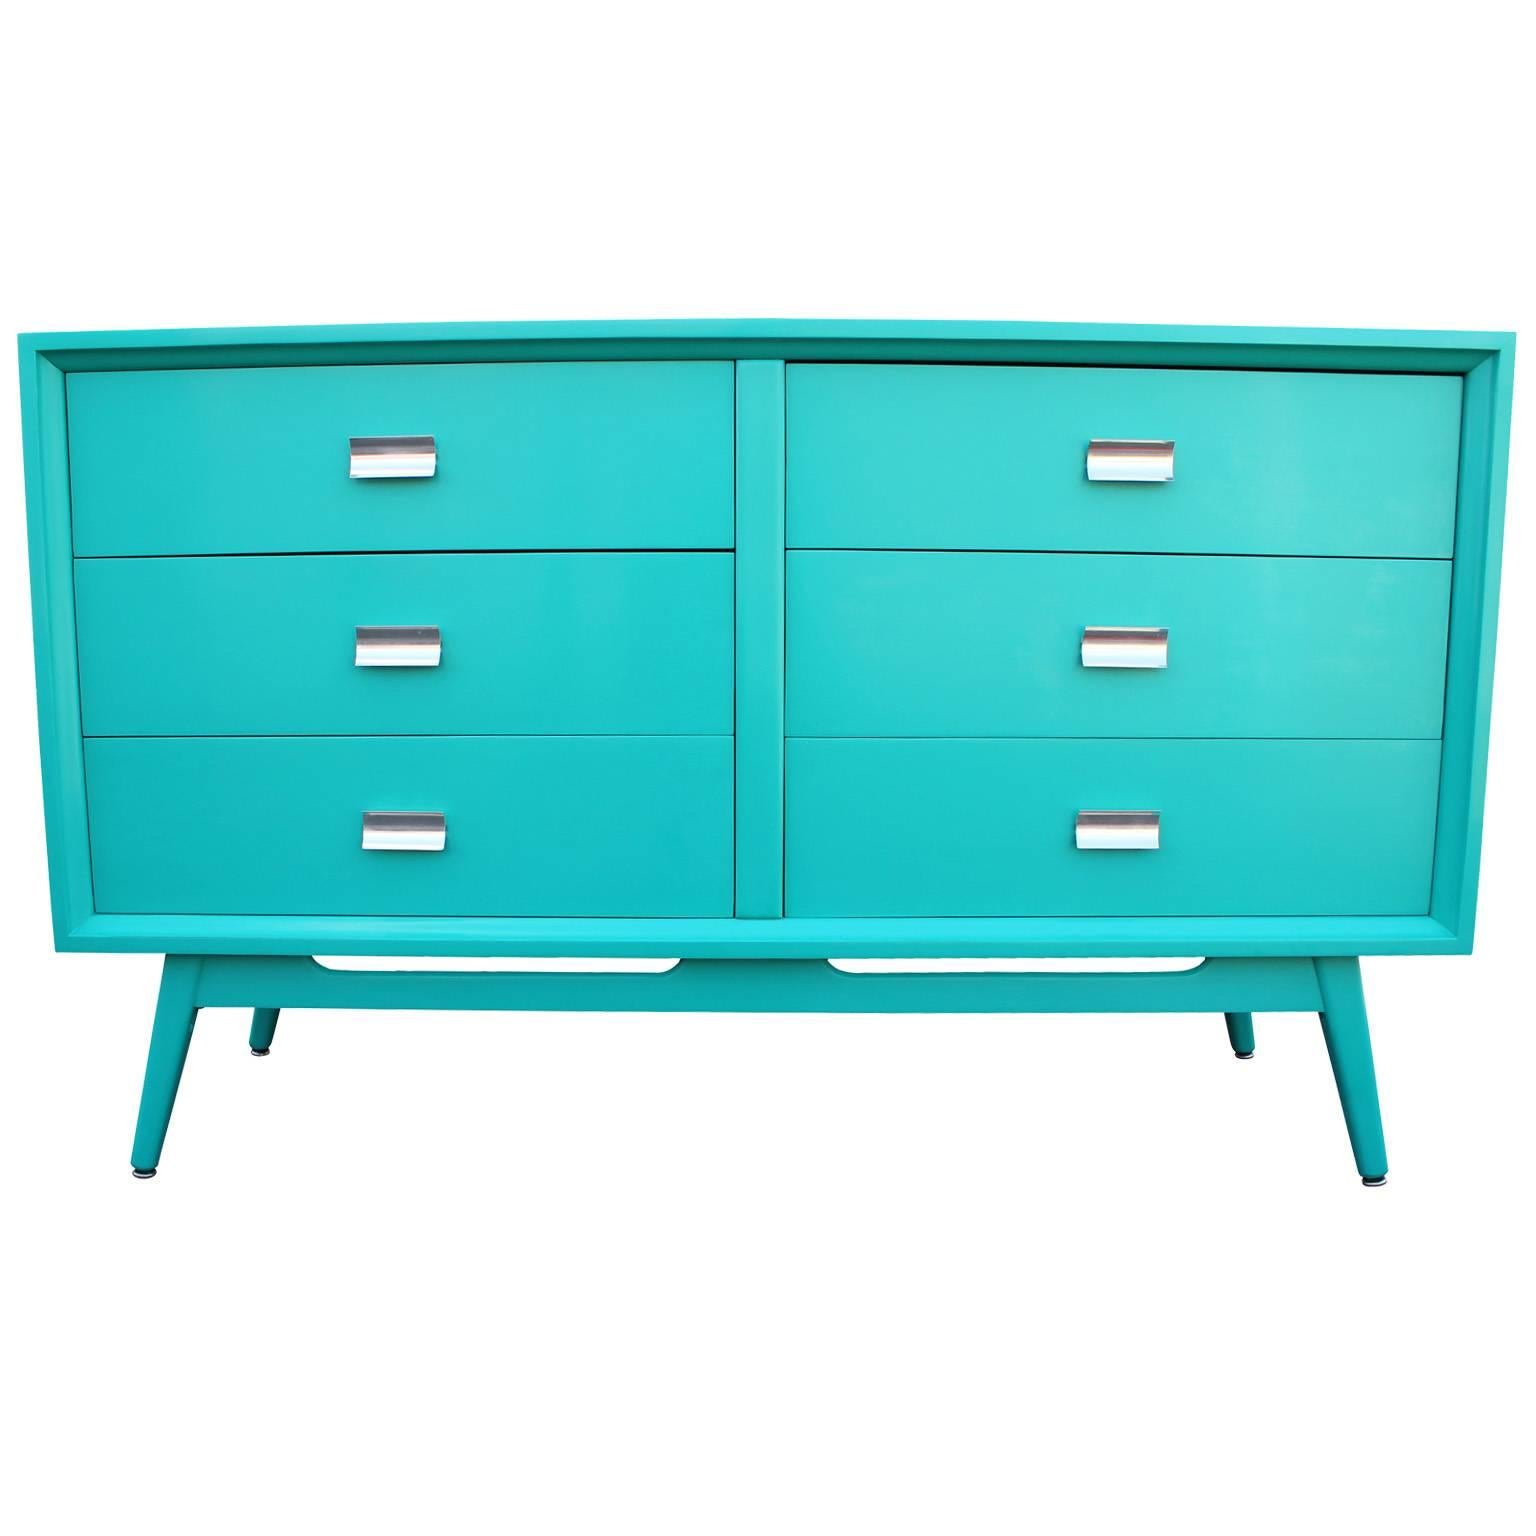 Incredible six-drawer dresser. Dresser has been expertly restored in a teal or turquoise lacquer. Shiny chrome pulls. Splayed and tapered base has negative space accents adding lightness to the piece. Stunning from all angles.